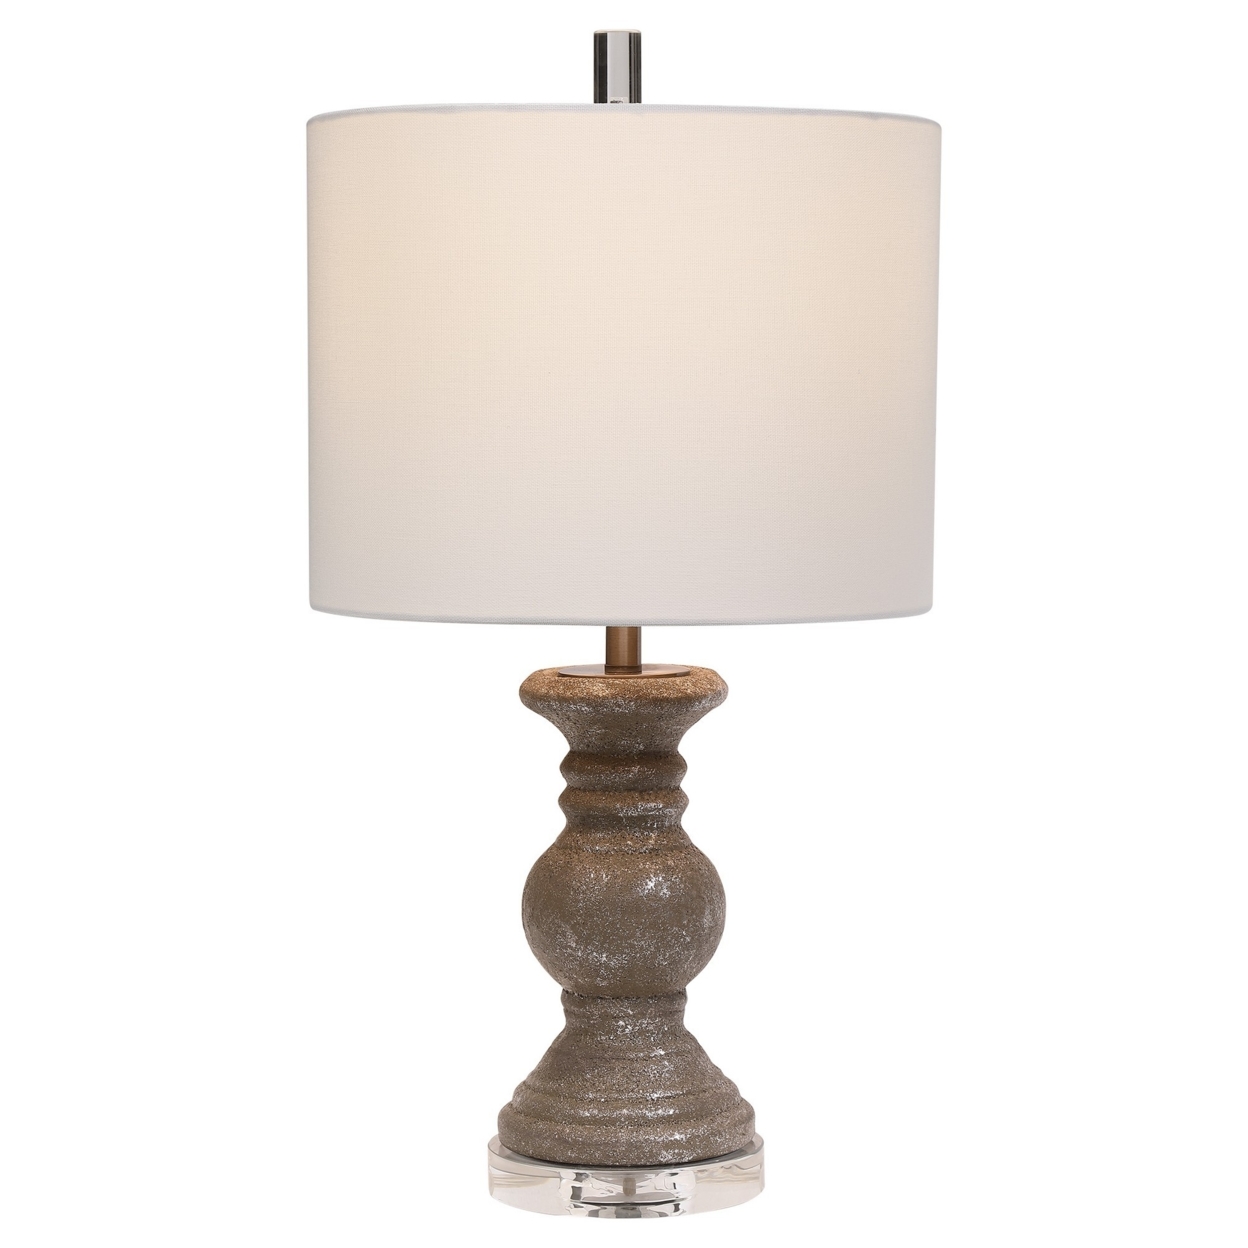 Turned Pedestal Style Ceramic Table Lamp With Fabric Shade, Brown- Saltoro Sherpi